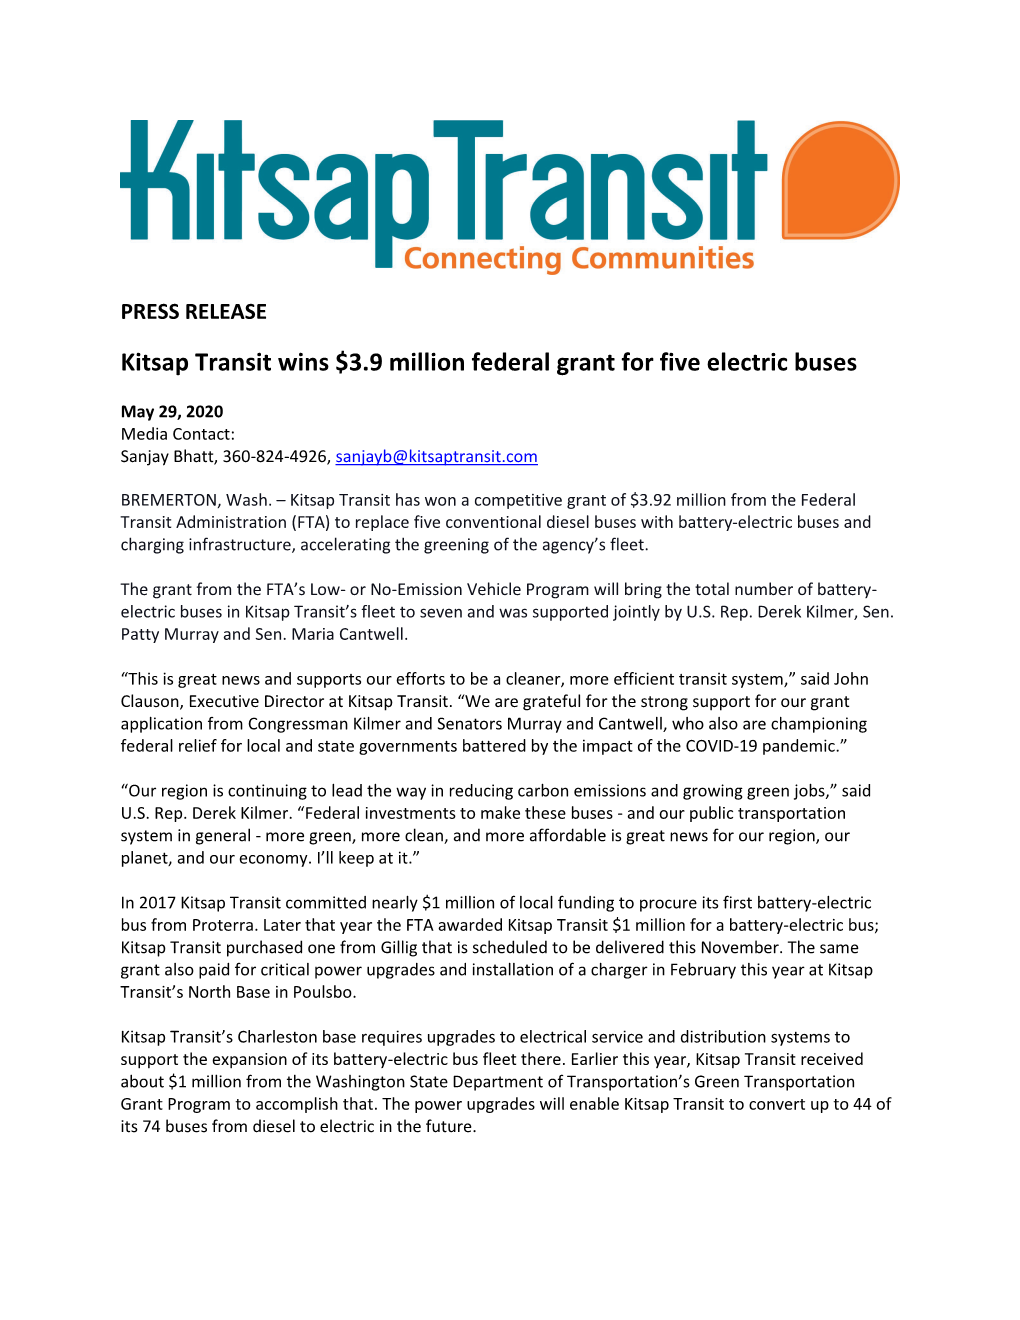 Kitsap Transit Wins $3.9 Million Federal Grant for Five Electric Buses